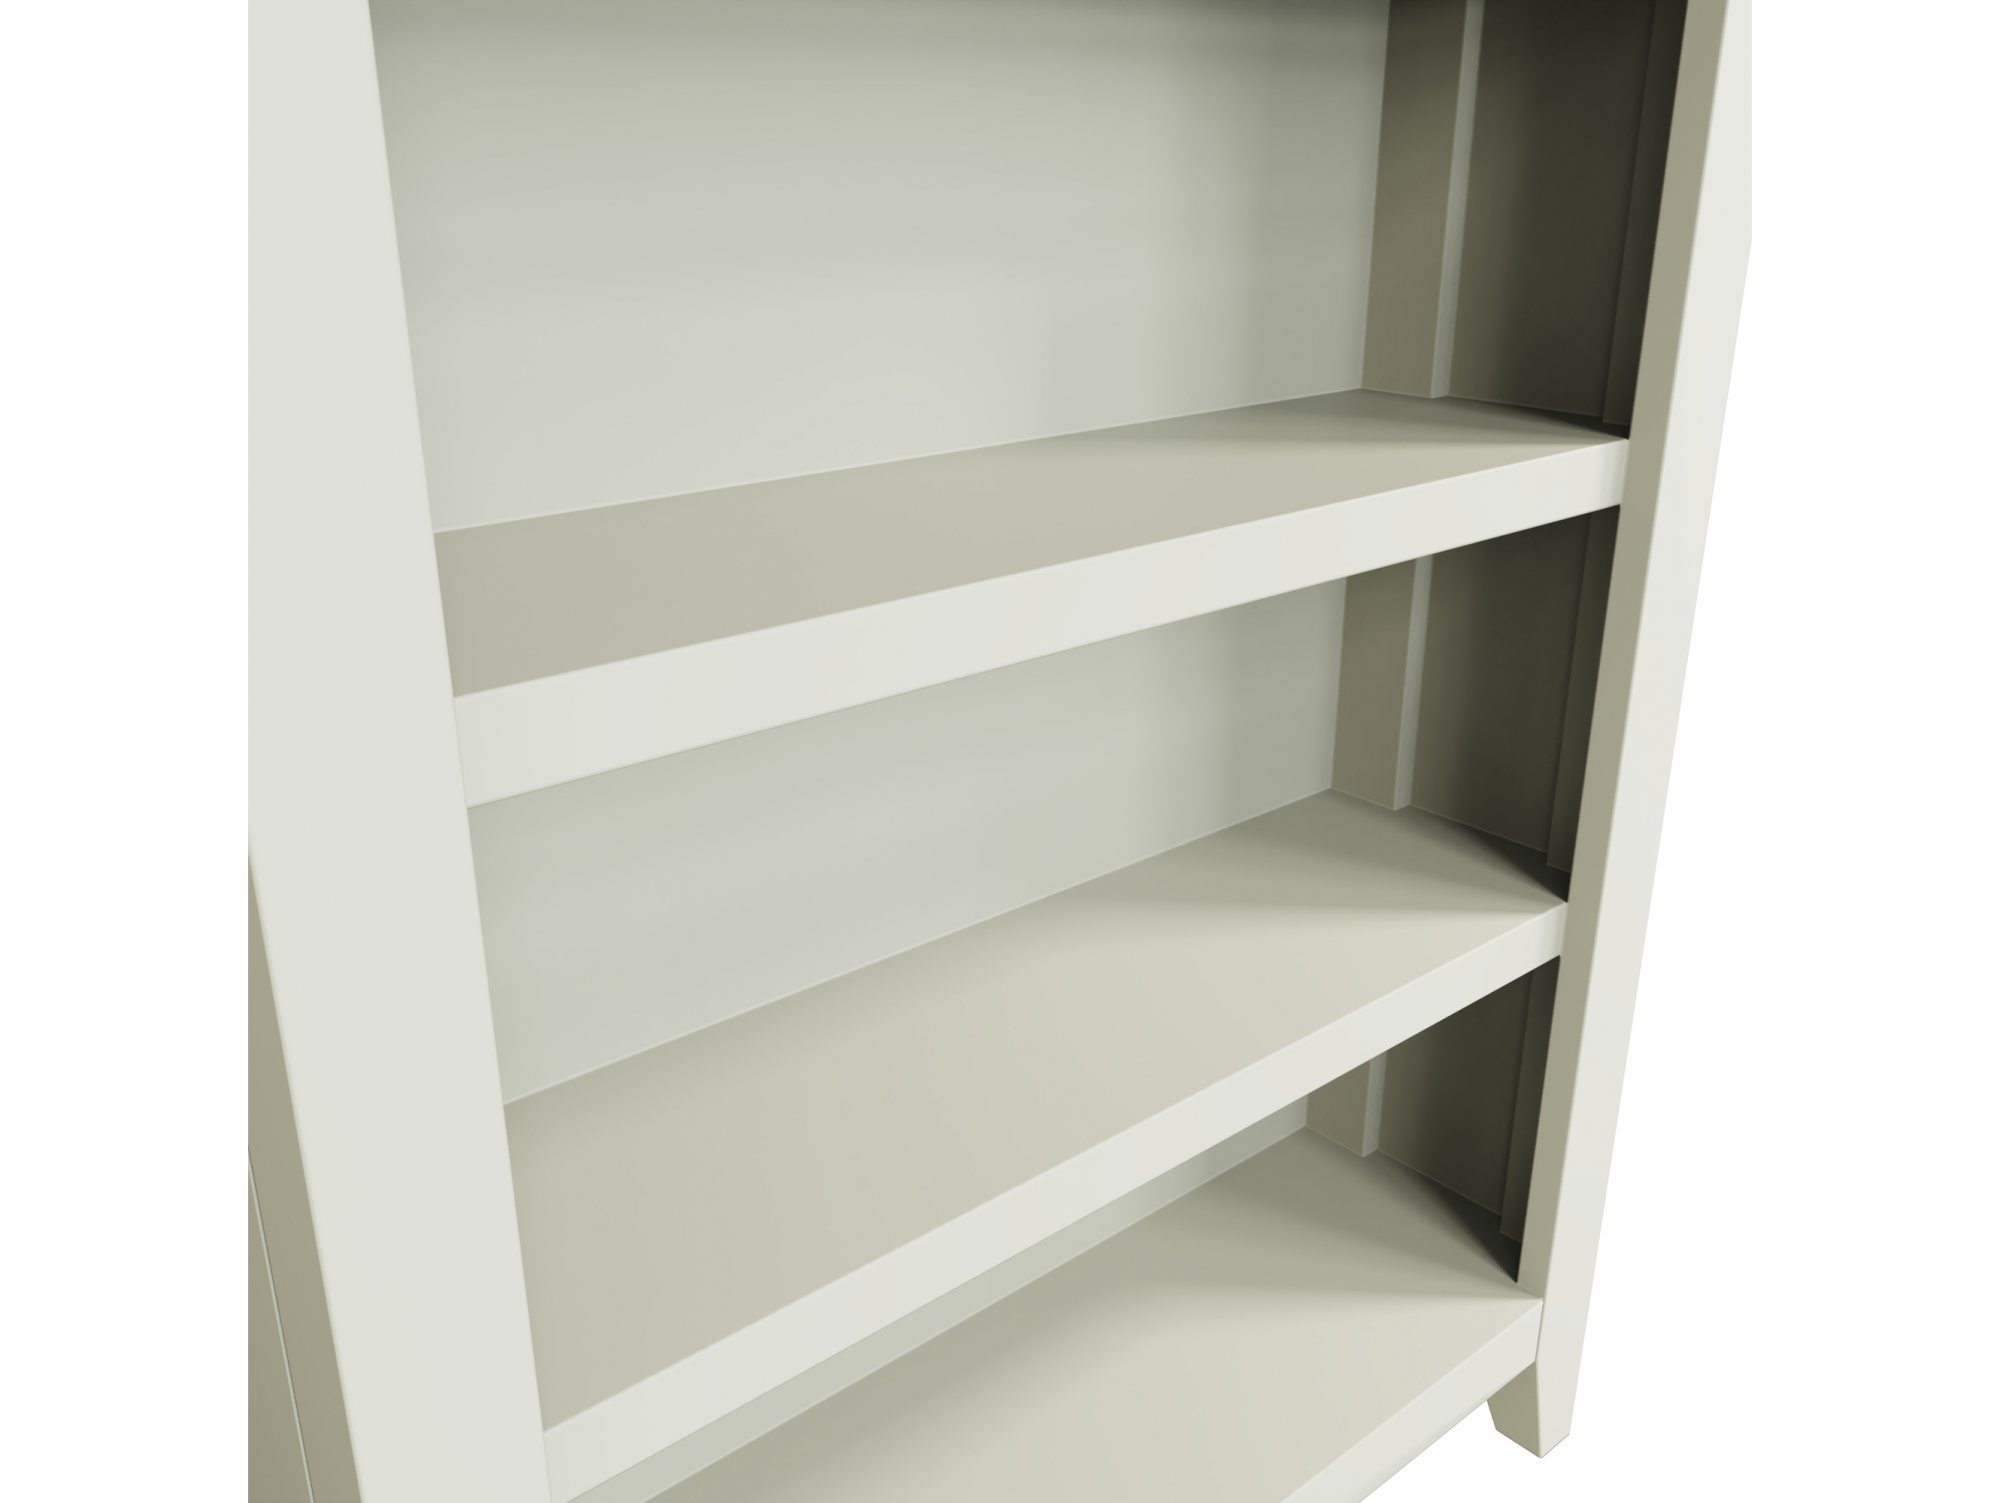 Kenmore Kenmore Patterdale White and Oak Low Bookcase (Assembled)